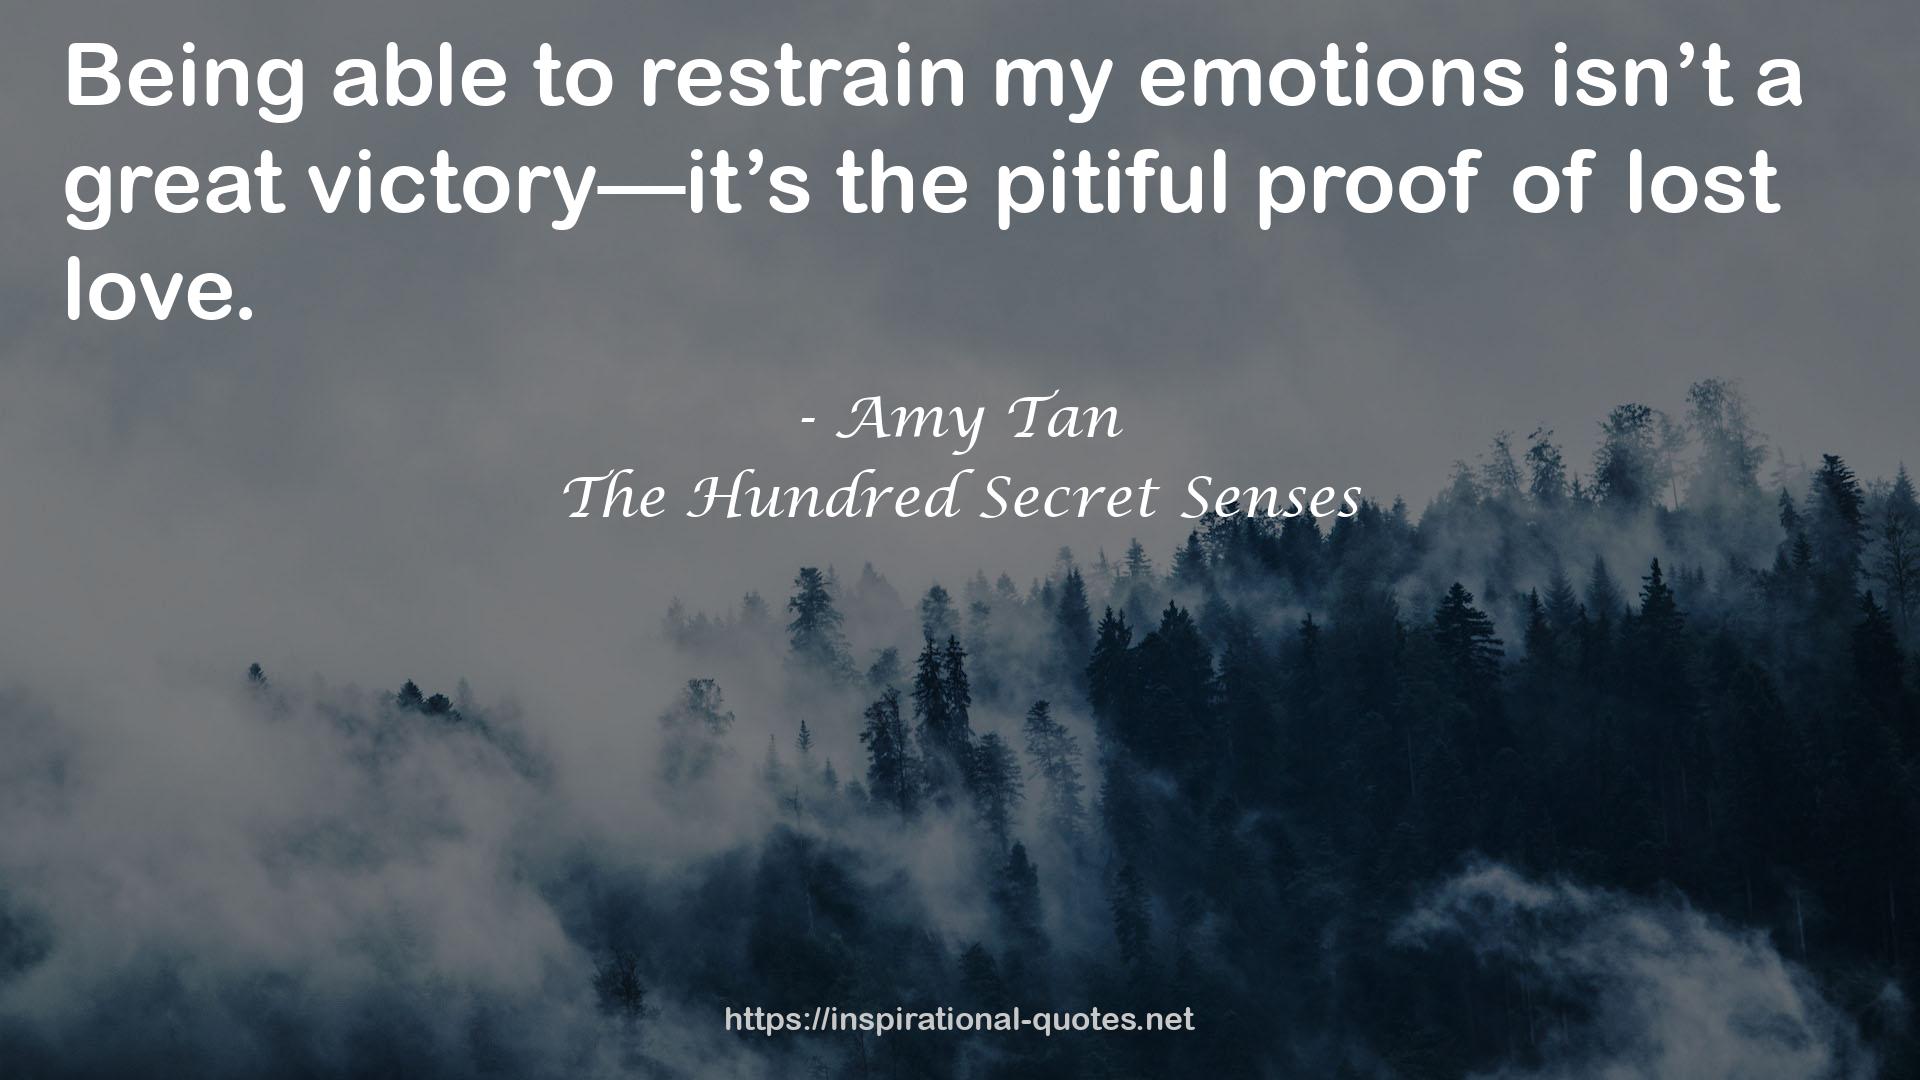 Amy Tan QUOTES